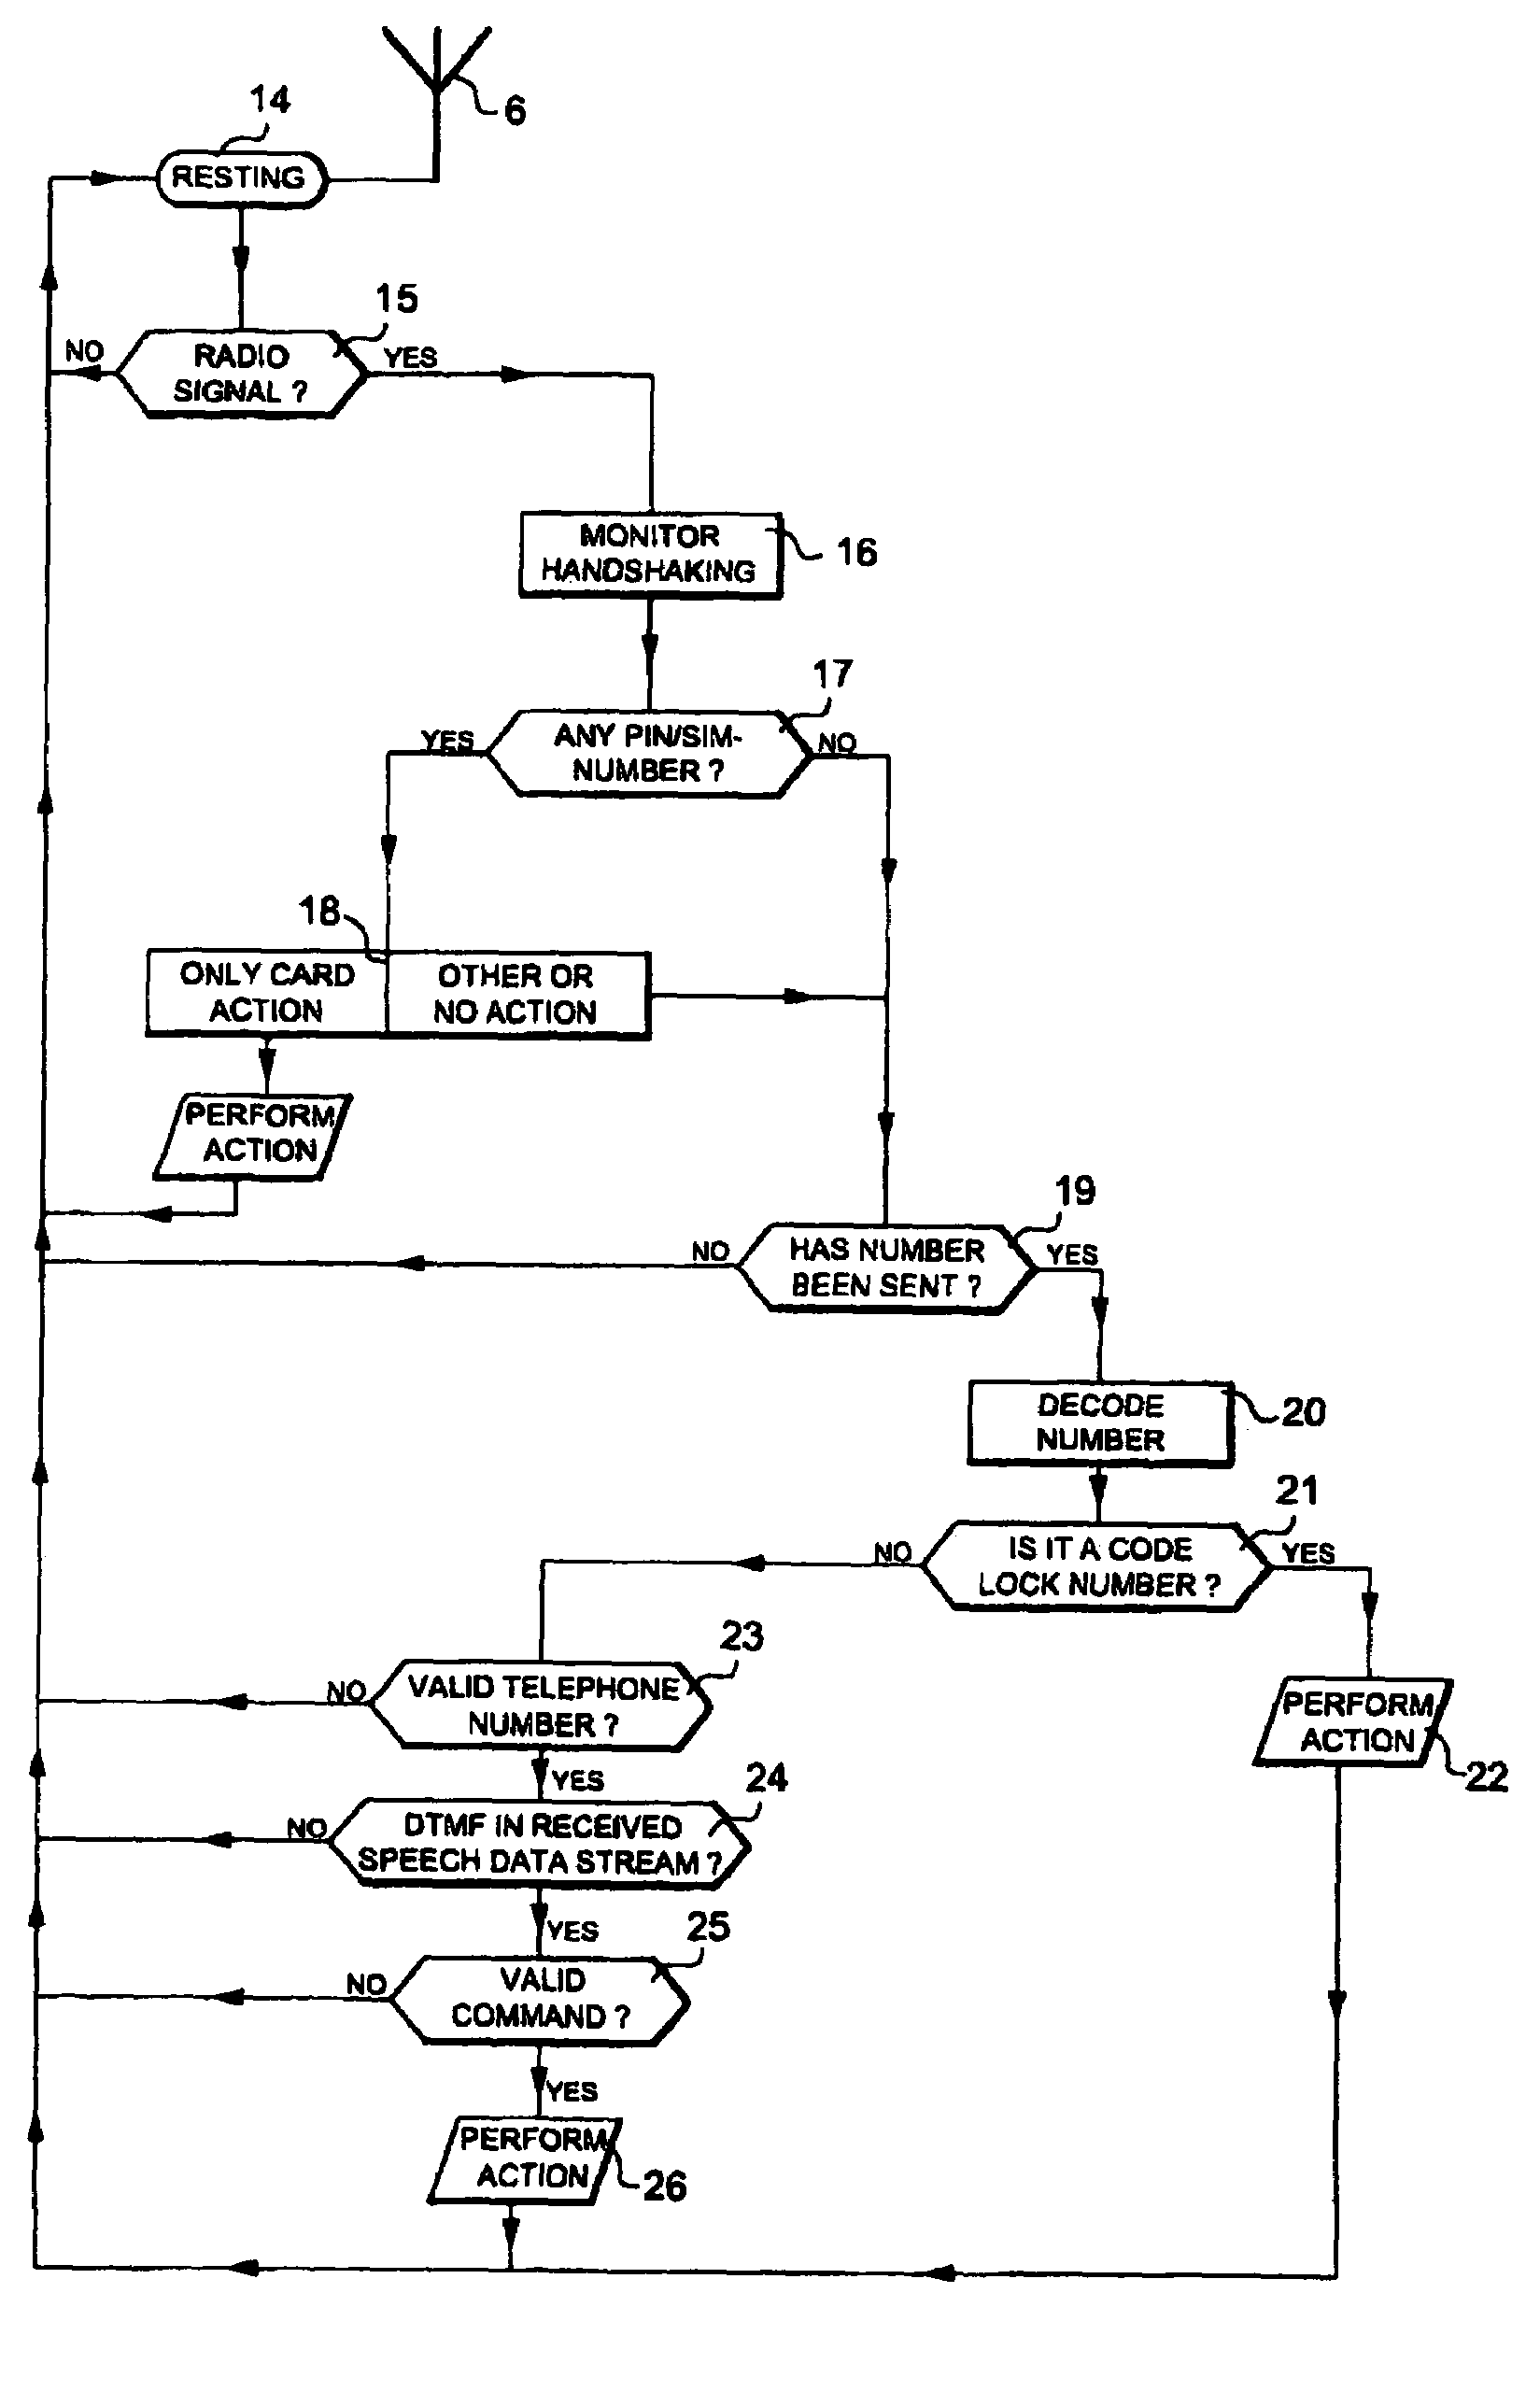 Method and device for utilization of mobile radio telephones for surveillance and/or control purposes